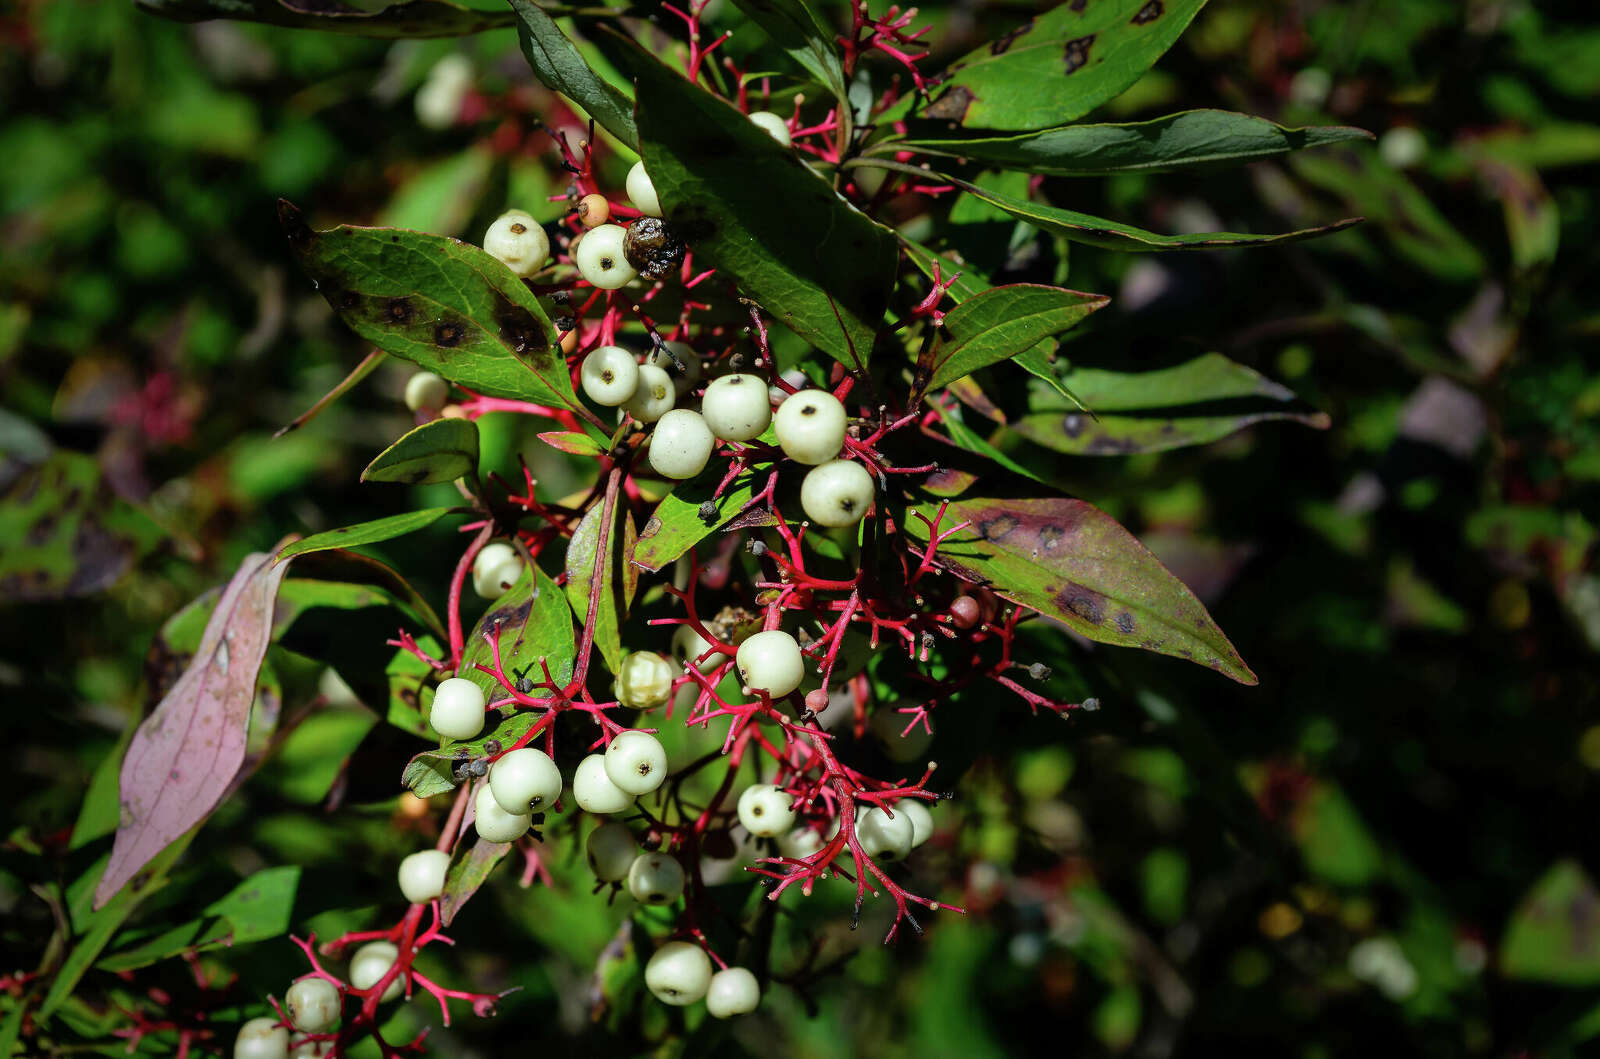 An image of poison sumac.